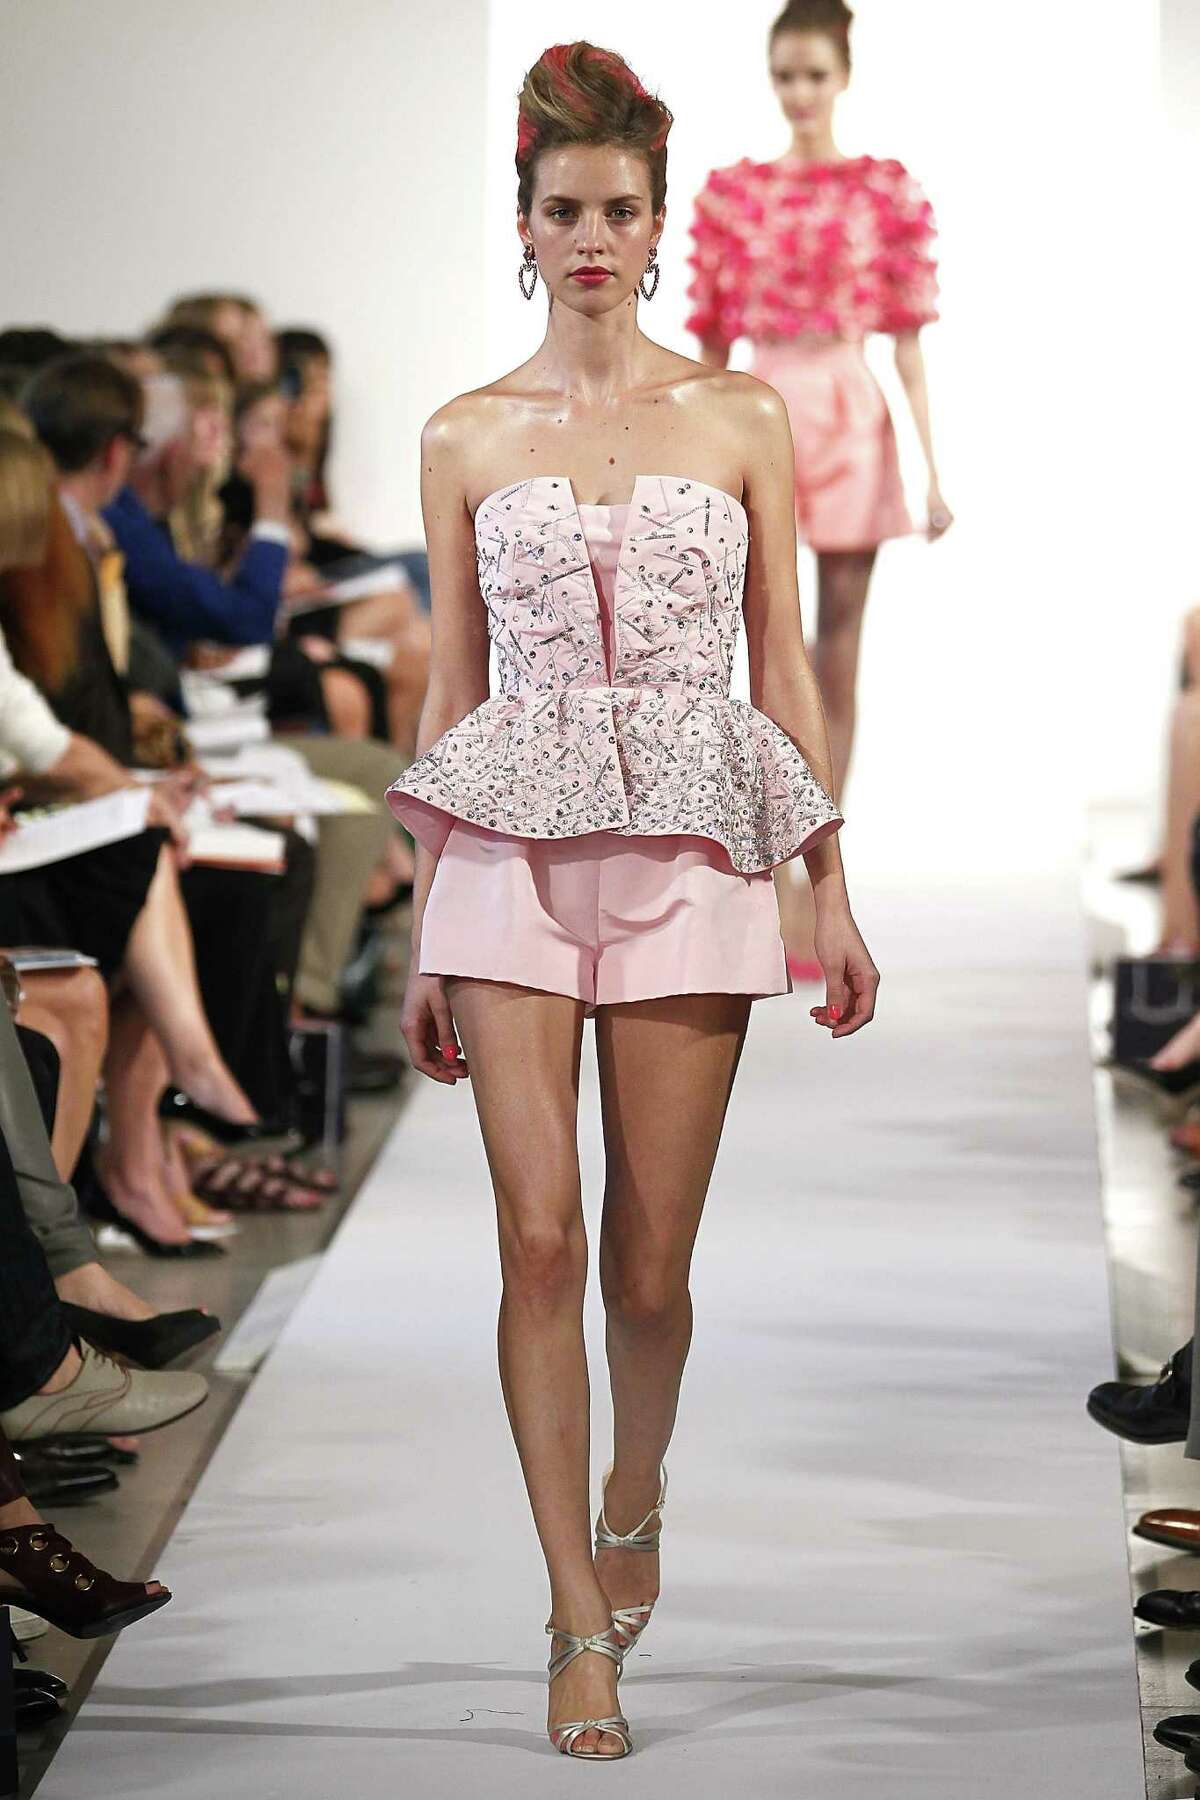 Oscar de la Renta offers flared cocktail shorts with a corset top.